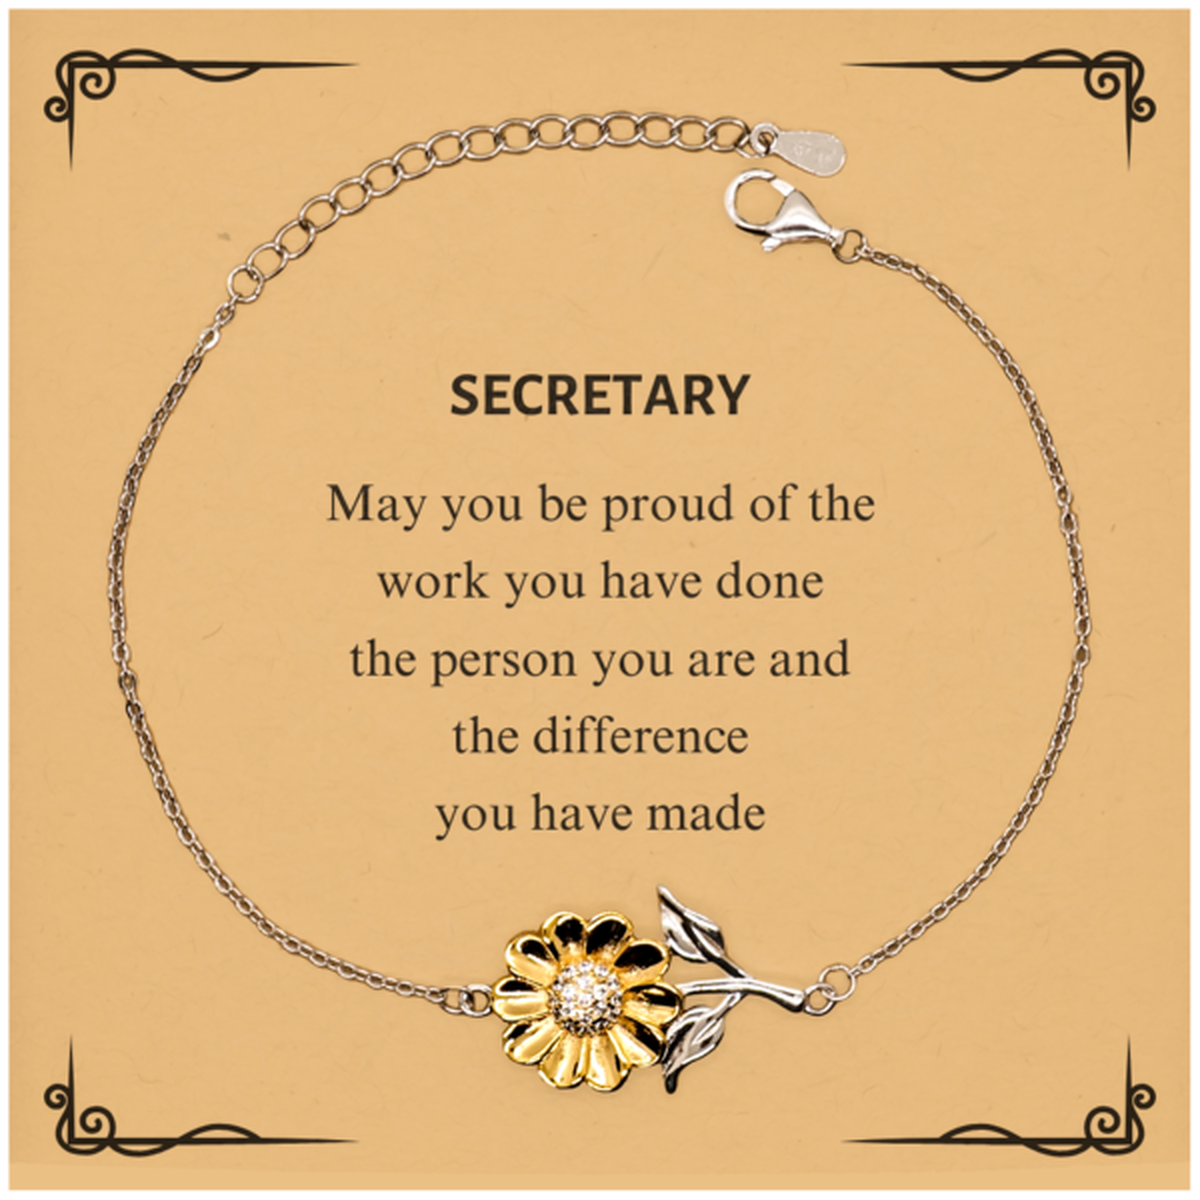 Secretary May you be proud of the work you have done, Retirement Secretary Sunflower Bracelet for Colleague Appreciation Gifts Amazing for Secretary